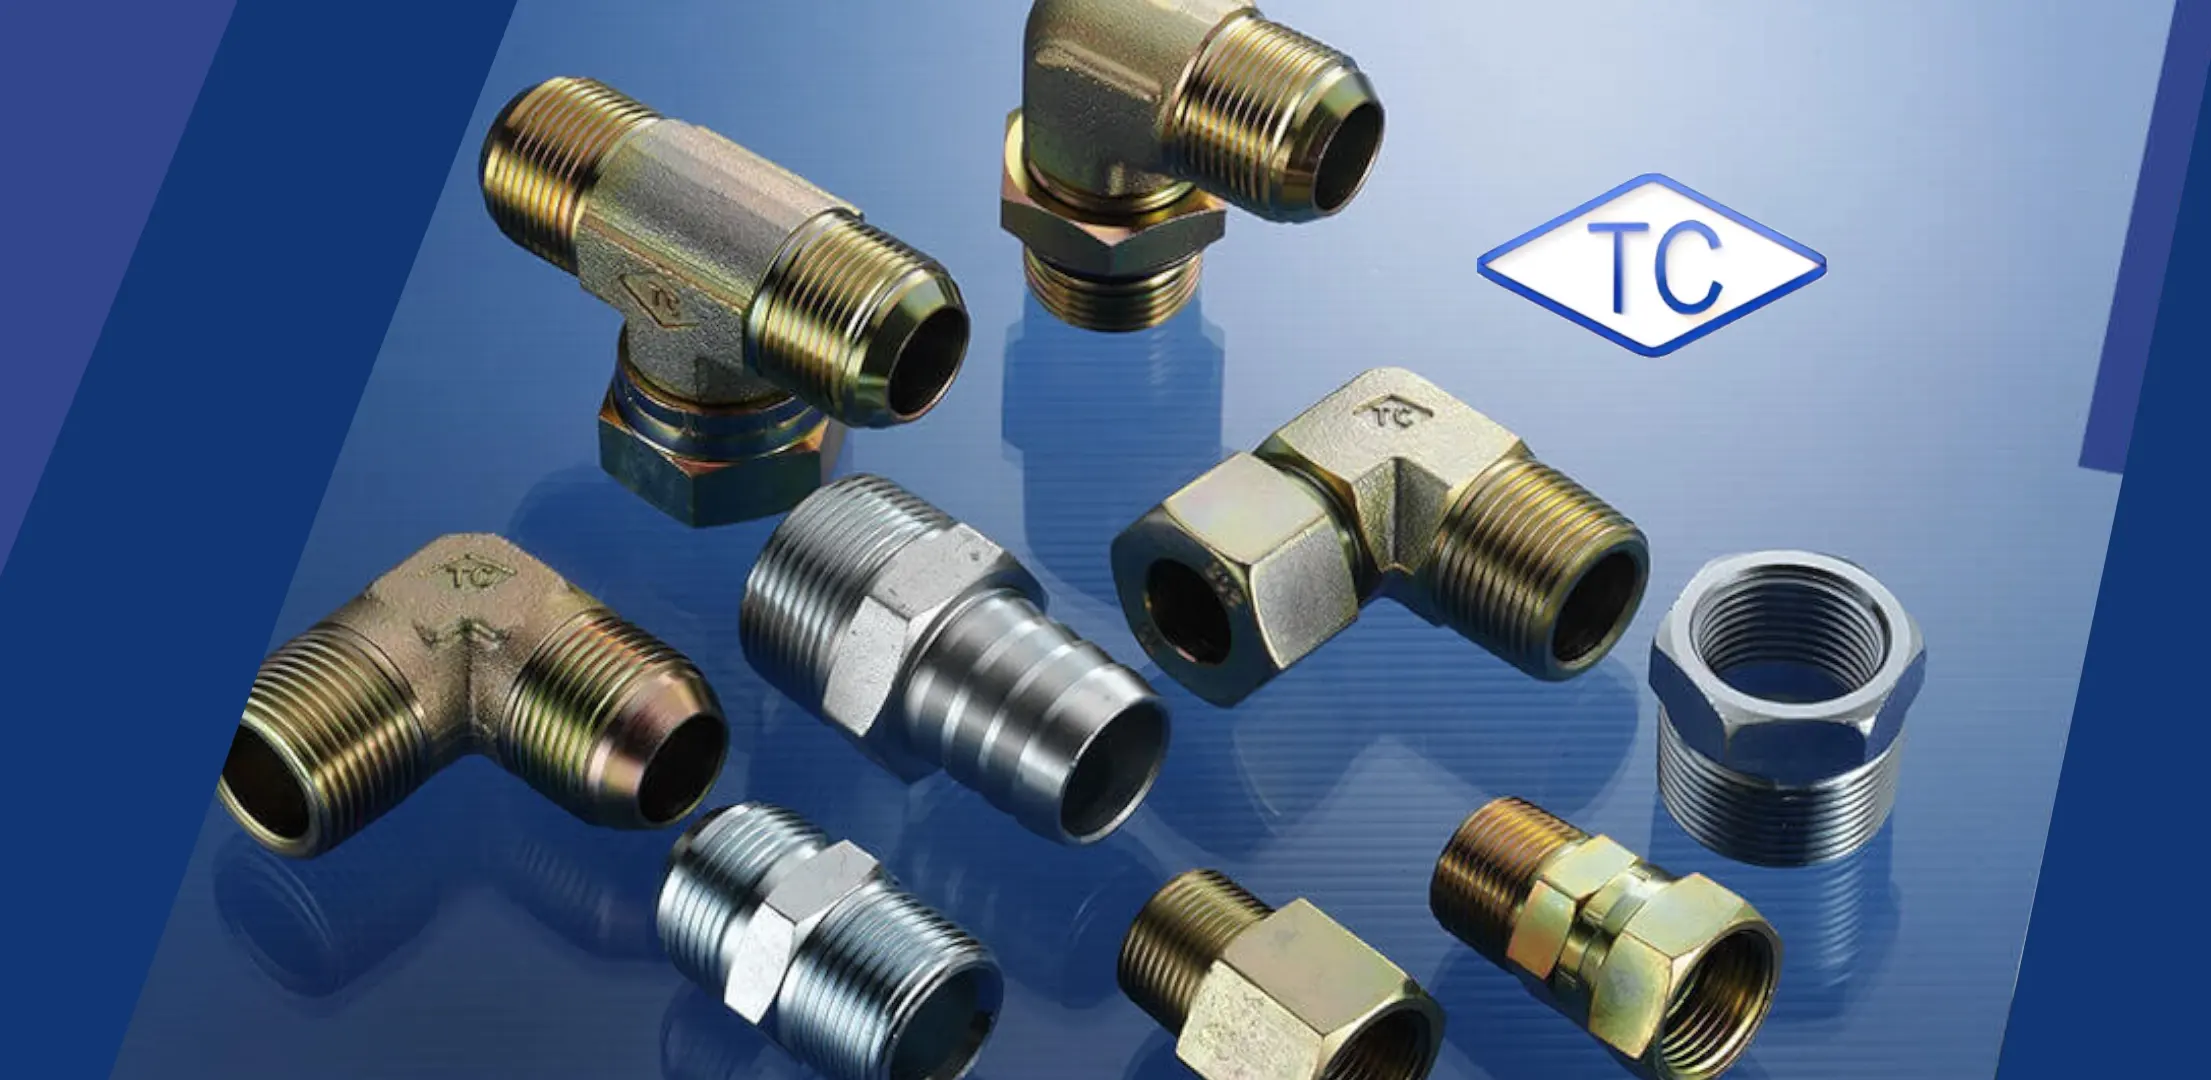 tai-chuan Hydraulic Tube Fittings、adapter、Connector